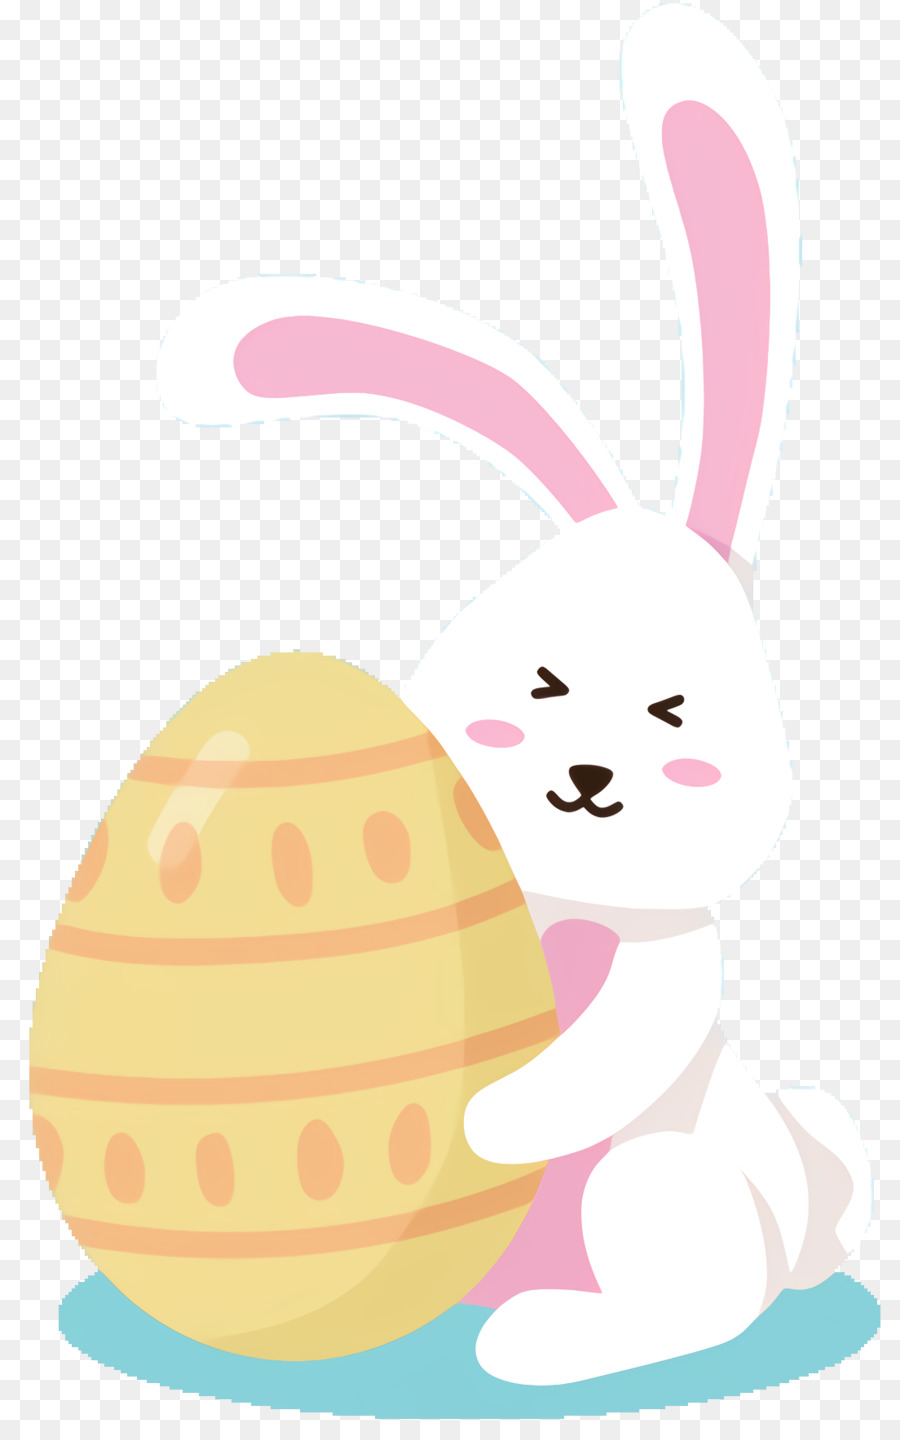 Thỏ Easter Bunny Easter Egg Minh họa - 